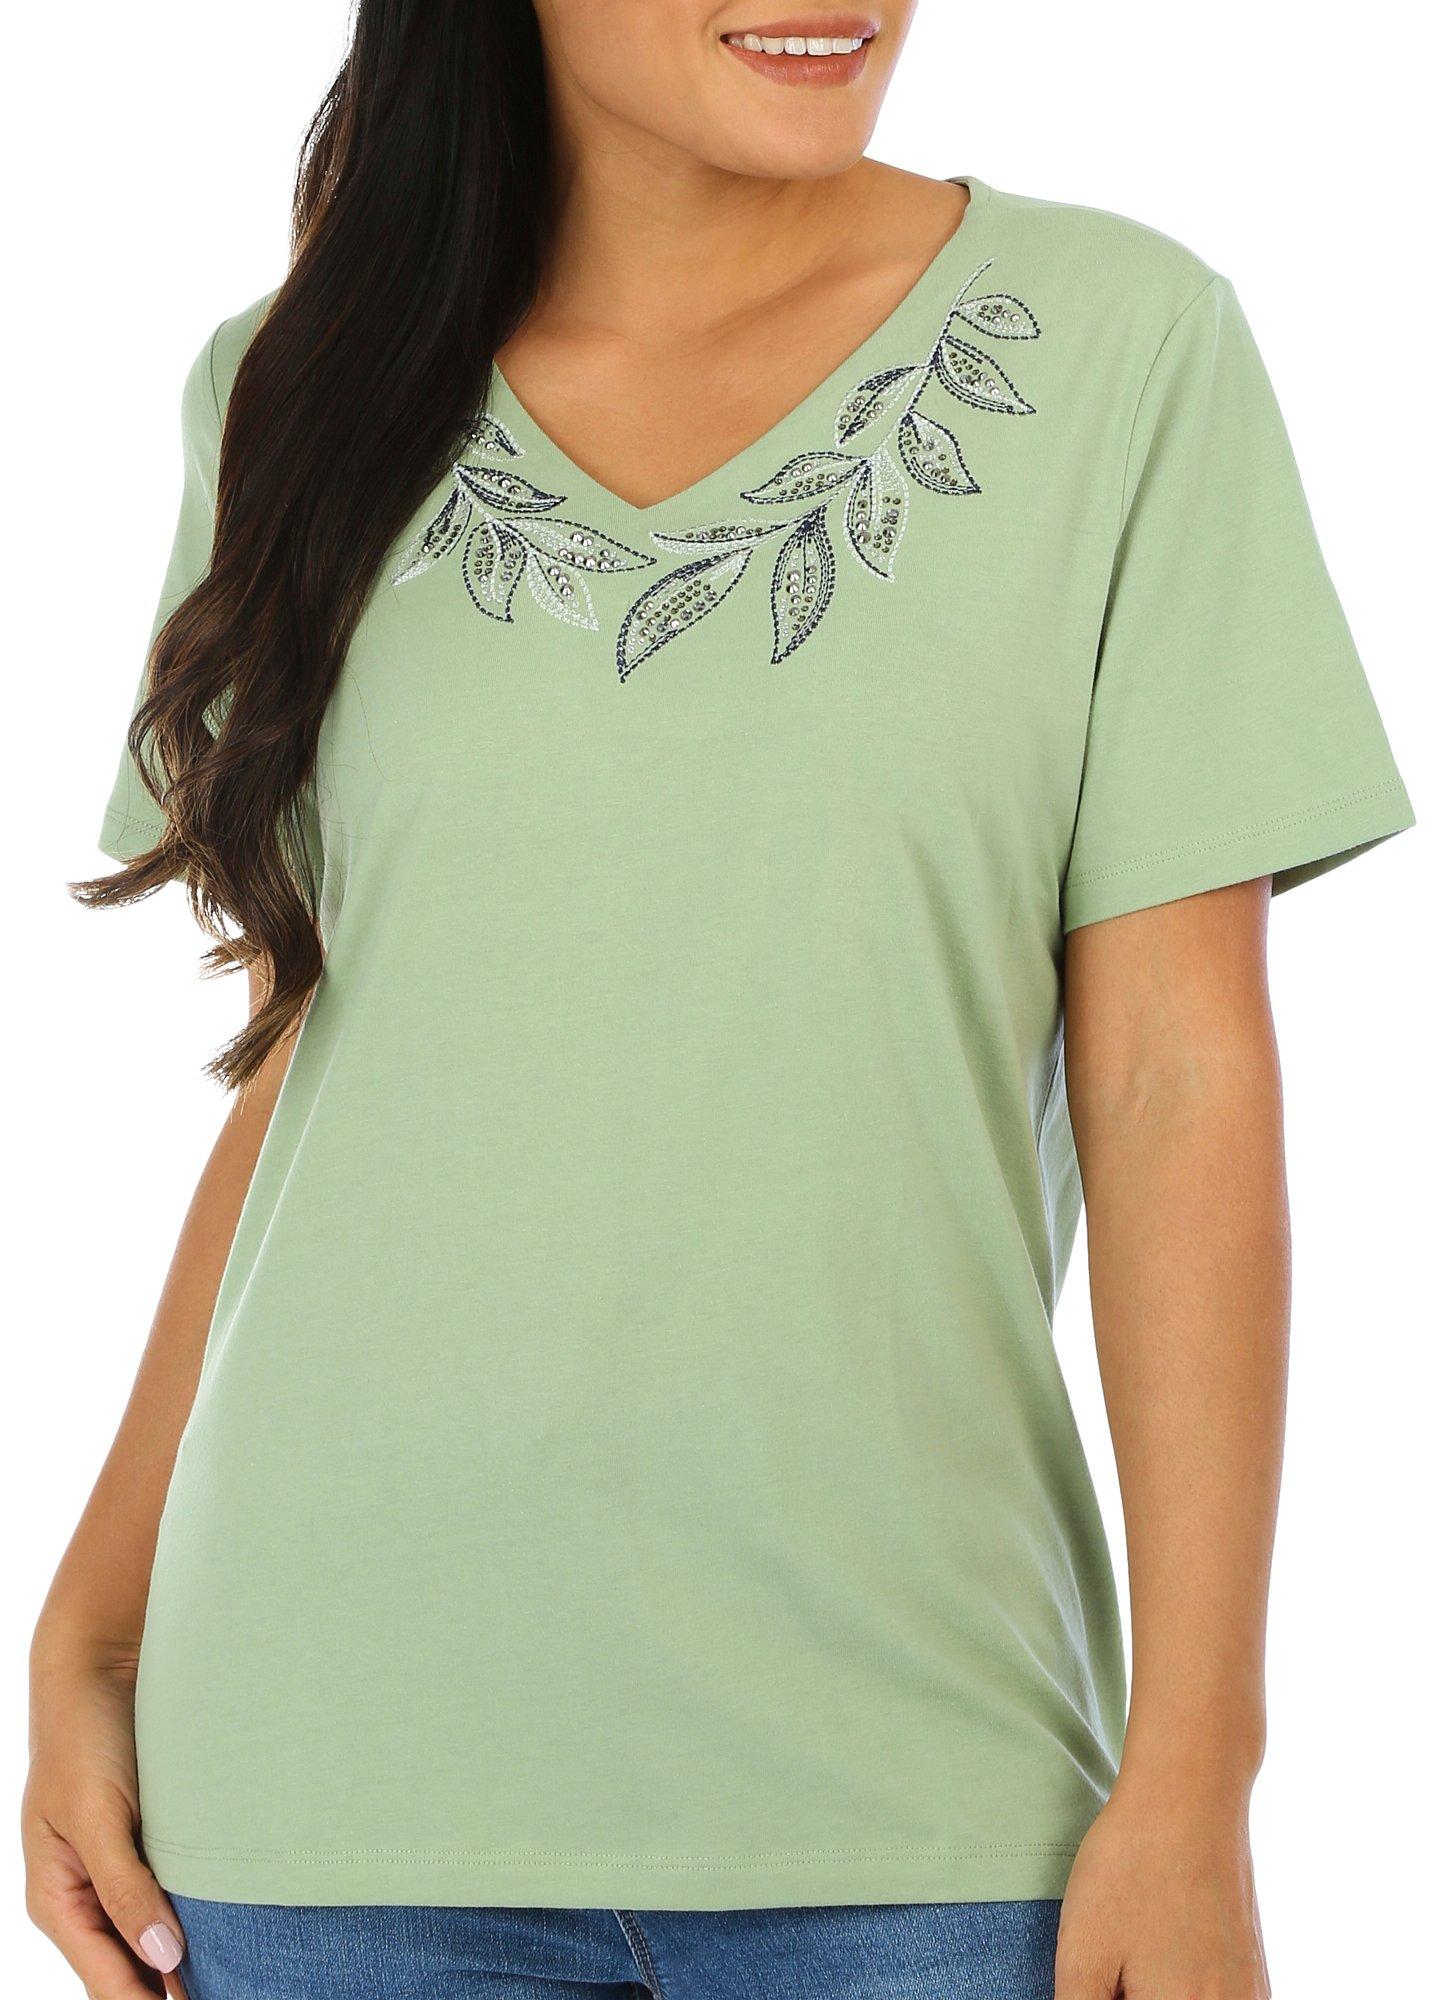 Coral Bay Petite Solid Foliage V-Neck Short Sleeve Top